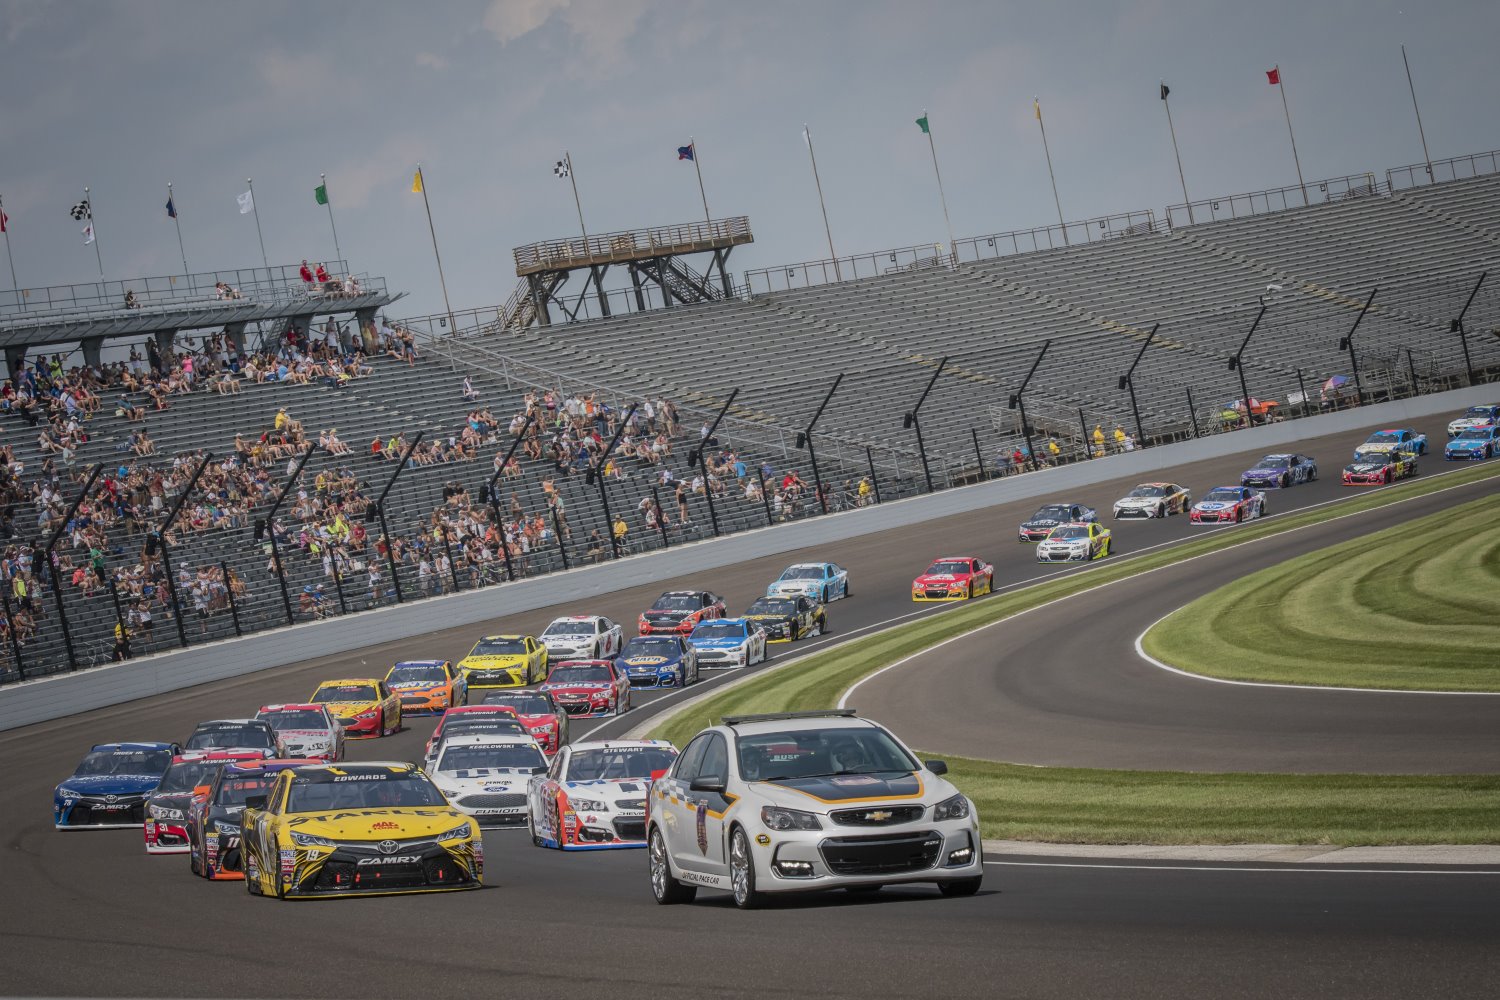 The heavy wallowing NASCAR Stock cars on the flat Indy track result in boring racing 